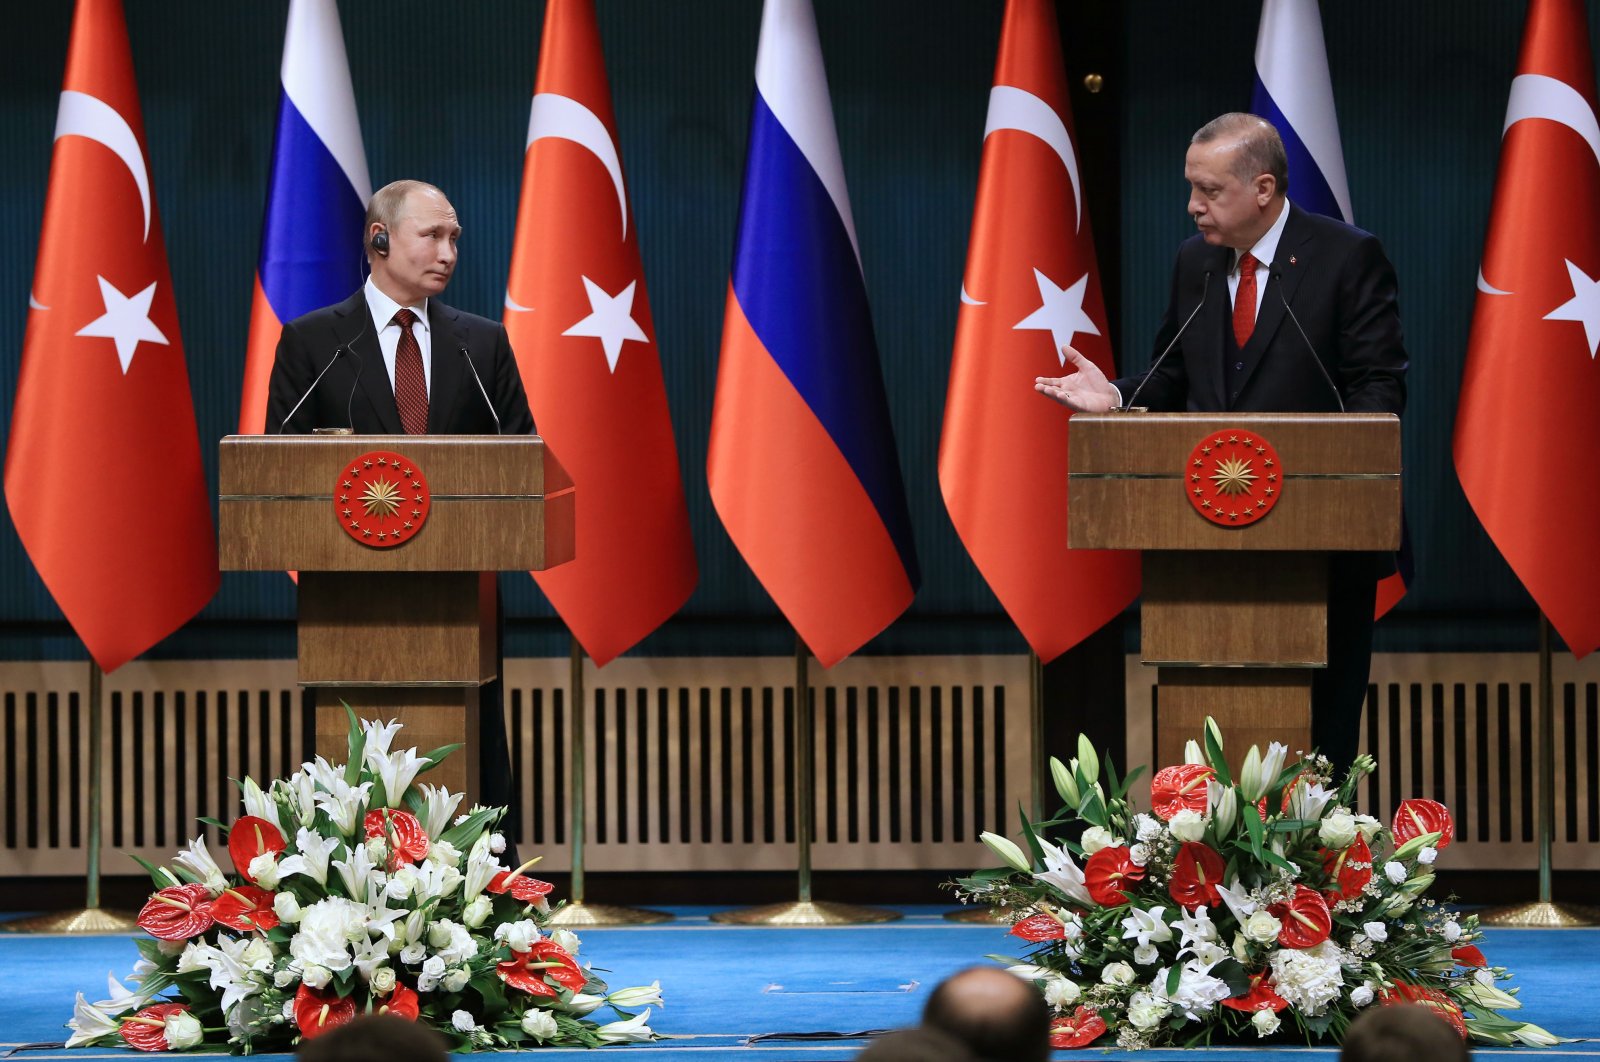 President Recep Tayyip Erdoğan speaks at a joint press conference with his Russian counterpart Vladimir Putin in the capital Ankara, Turkey, April 3, 2018. (Courtesy of the Turkish Presidency)